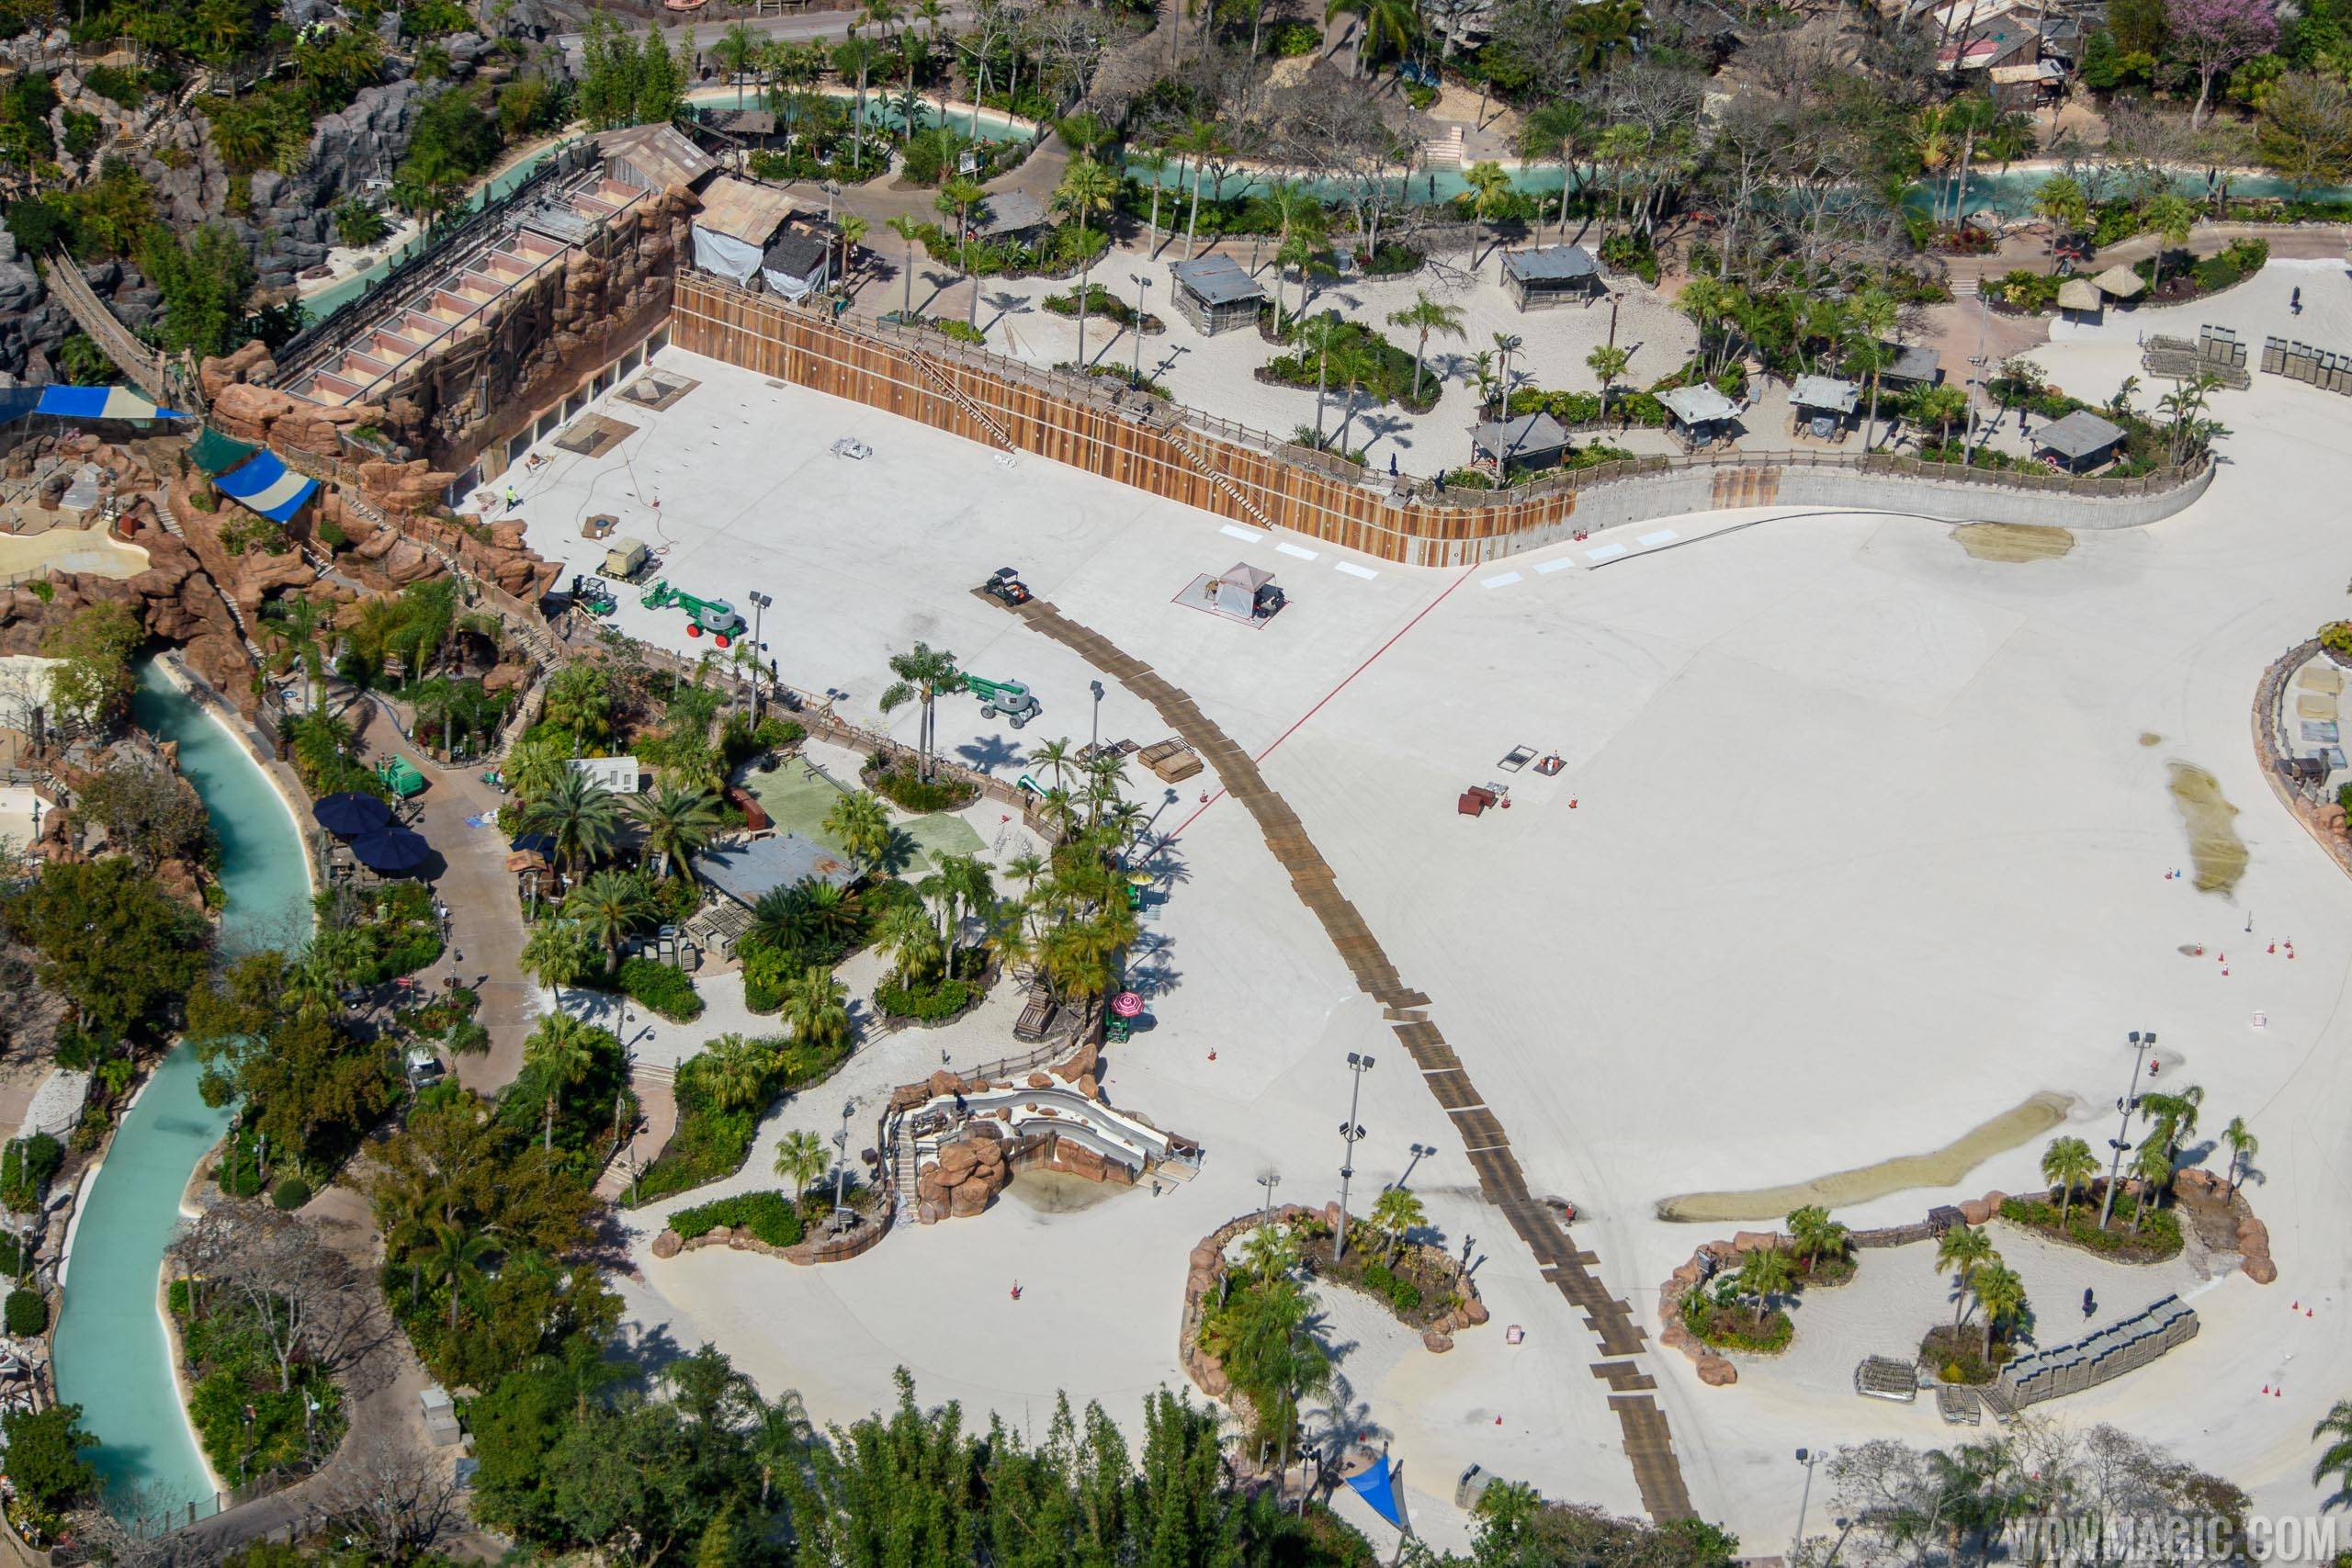 Aerial view of Typhoon Lagoon wave pool emptied